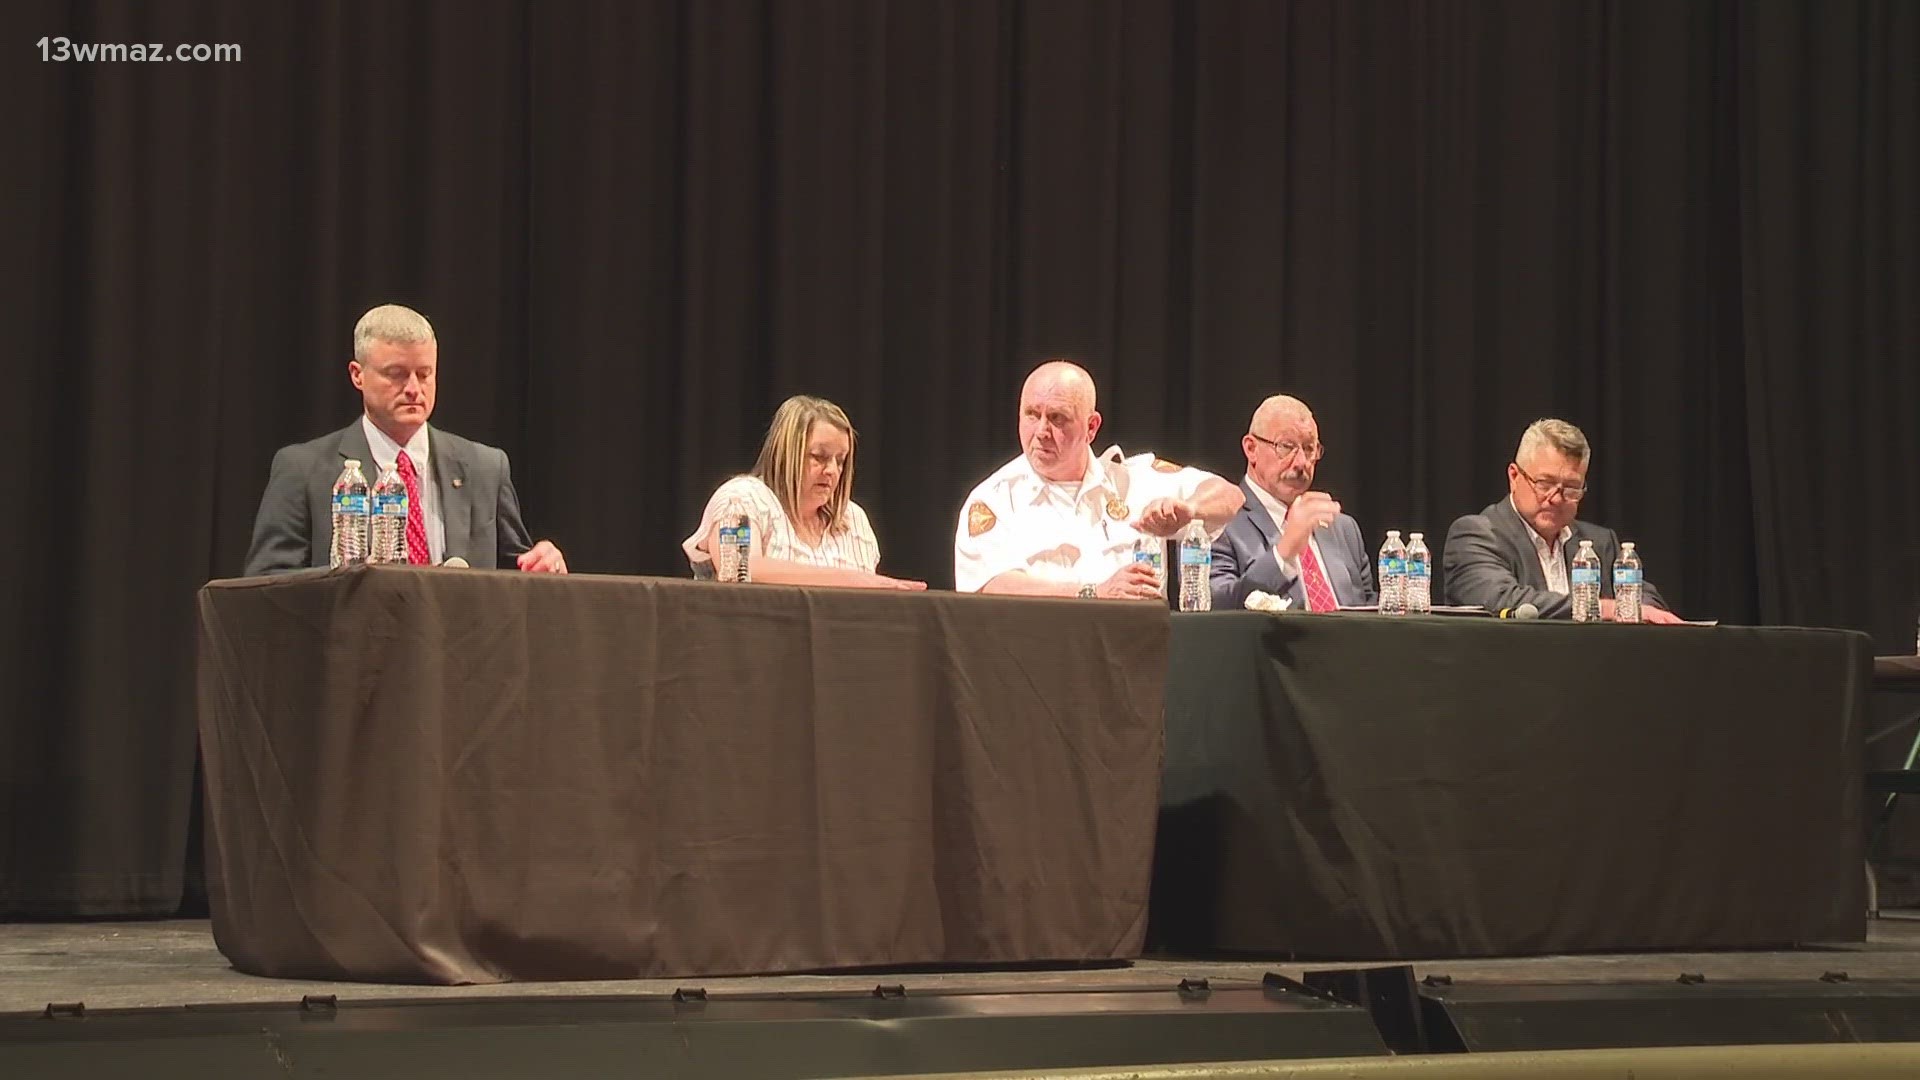 With the primary election a few weeks away, the Hawkinsville-Pulaski County chamber hosted a Political Town Hall.